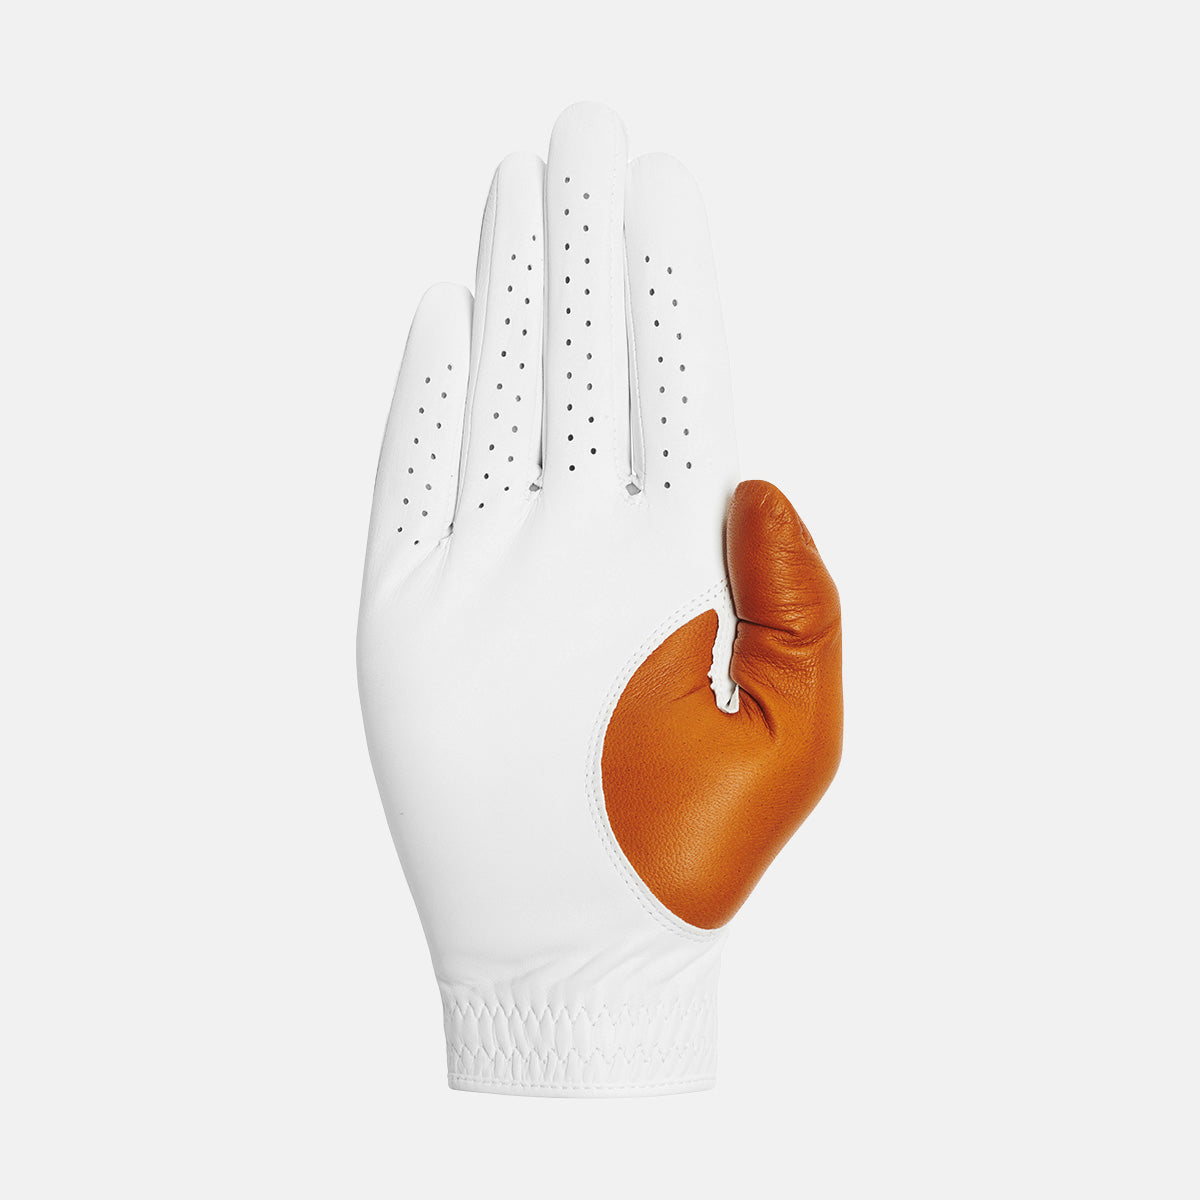 The Elite Pro Laguna Left-hand golf glove for the right-handed player made from 100% Premium Cabretta leather